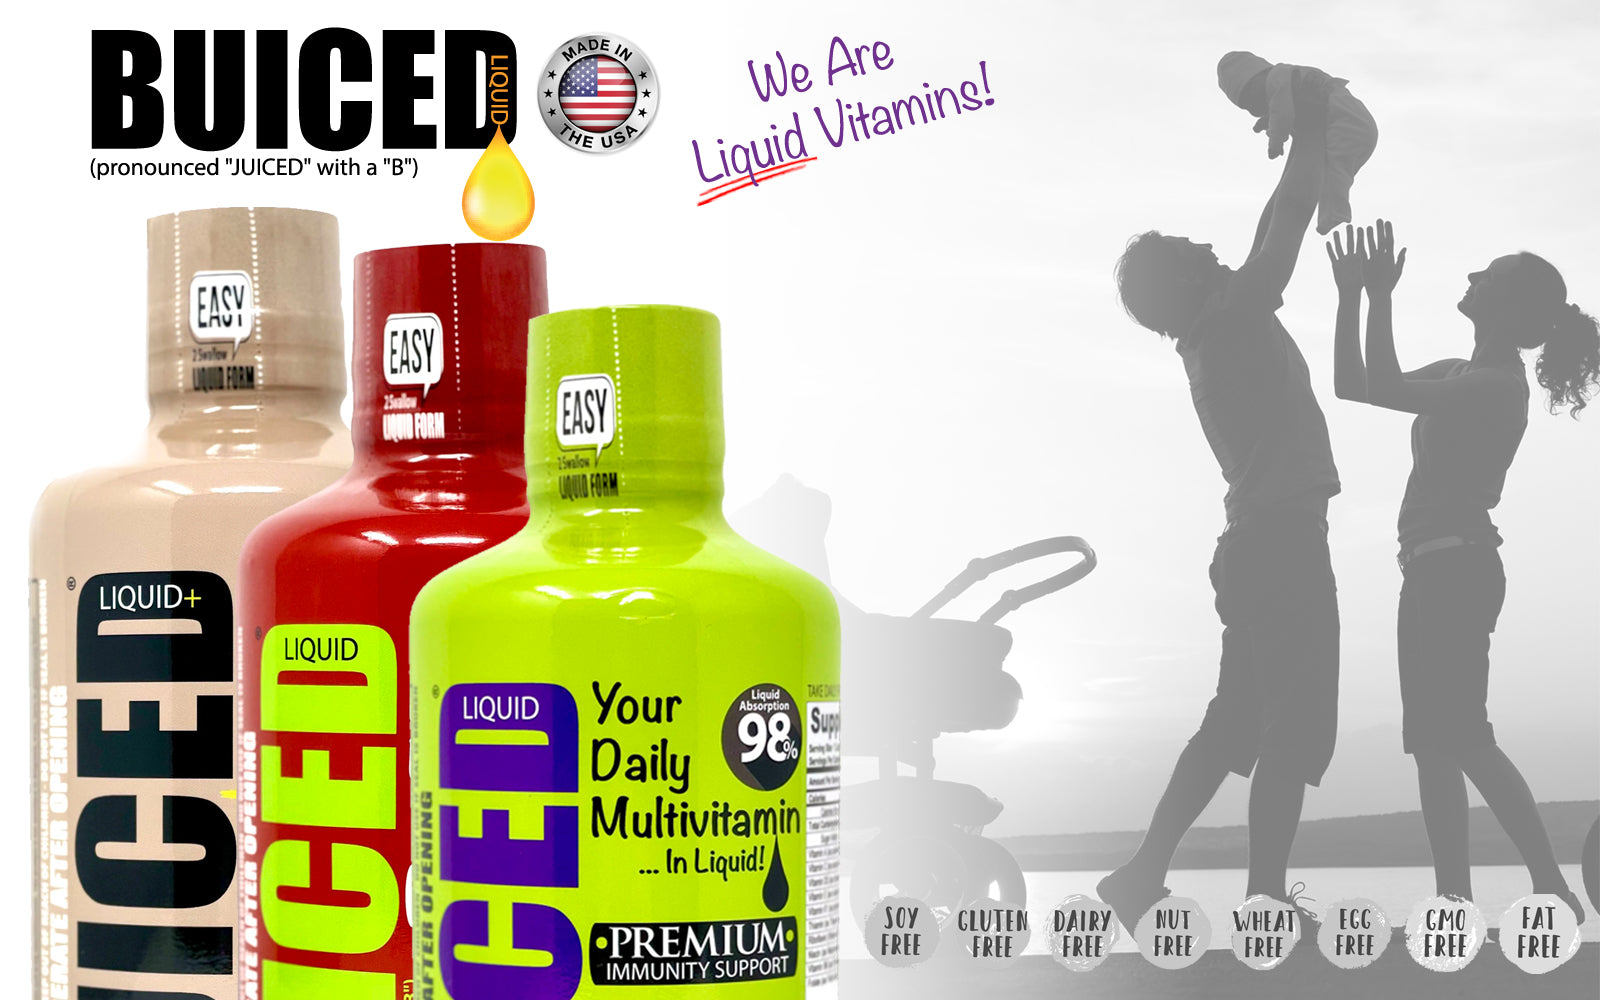 Meet BUICED Liquid Vitamins and TRY OUR GREAT TASTING FLAVORS!